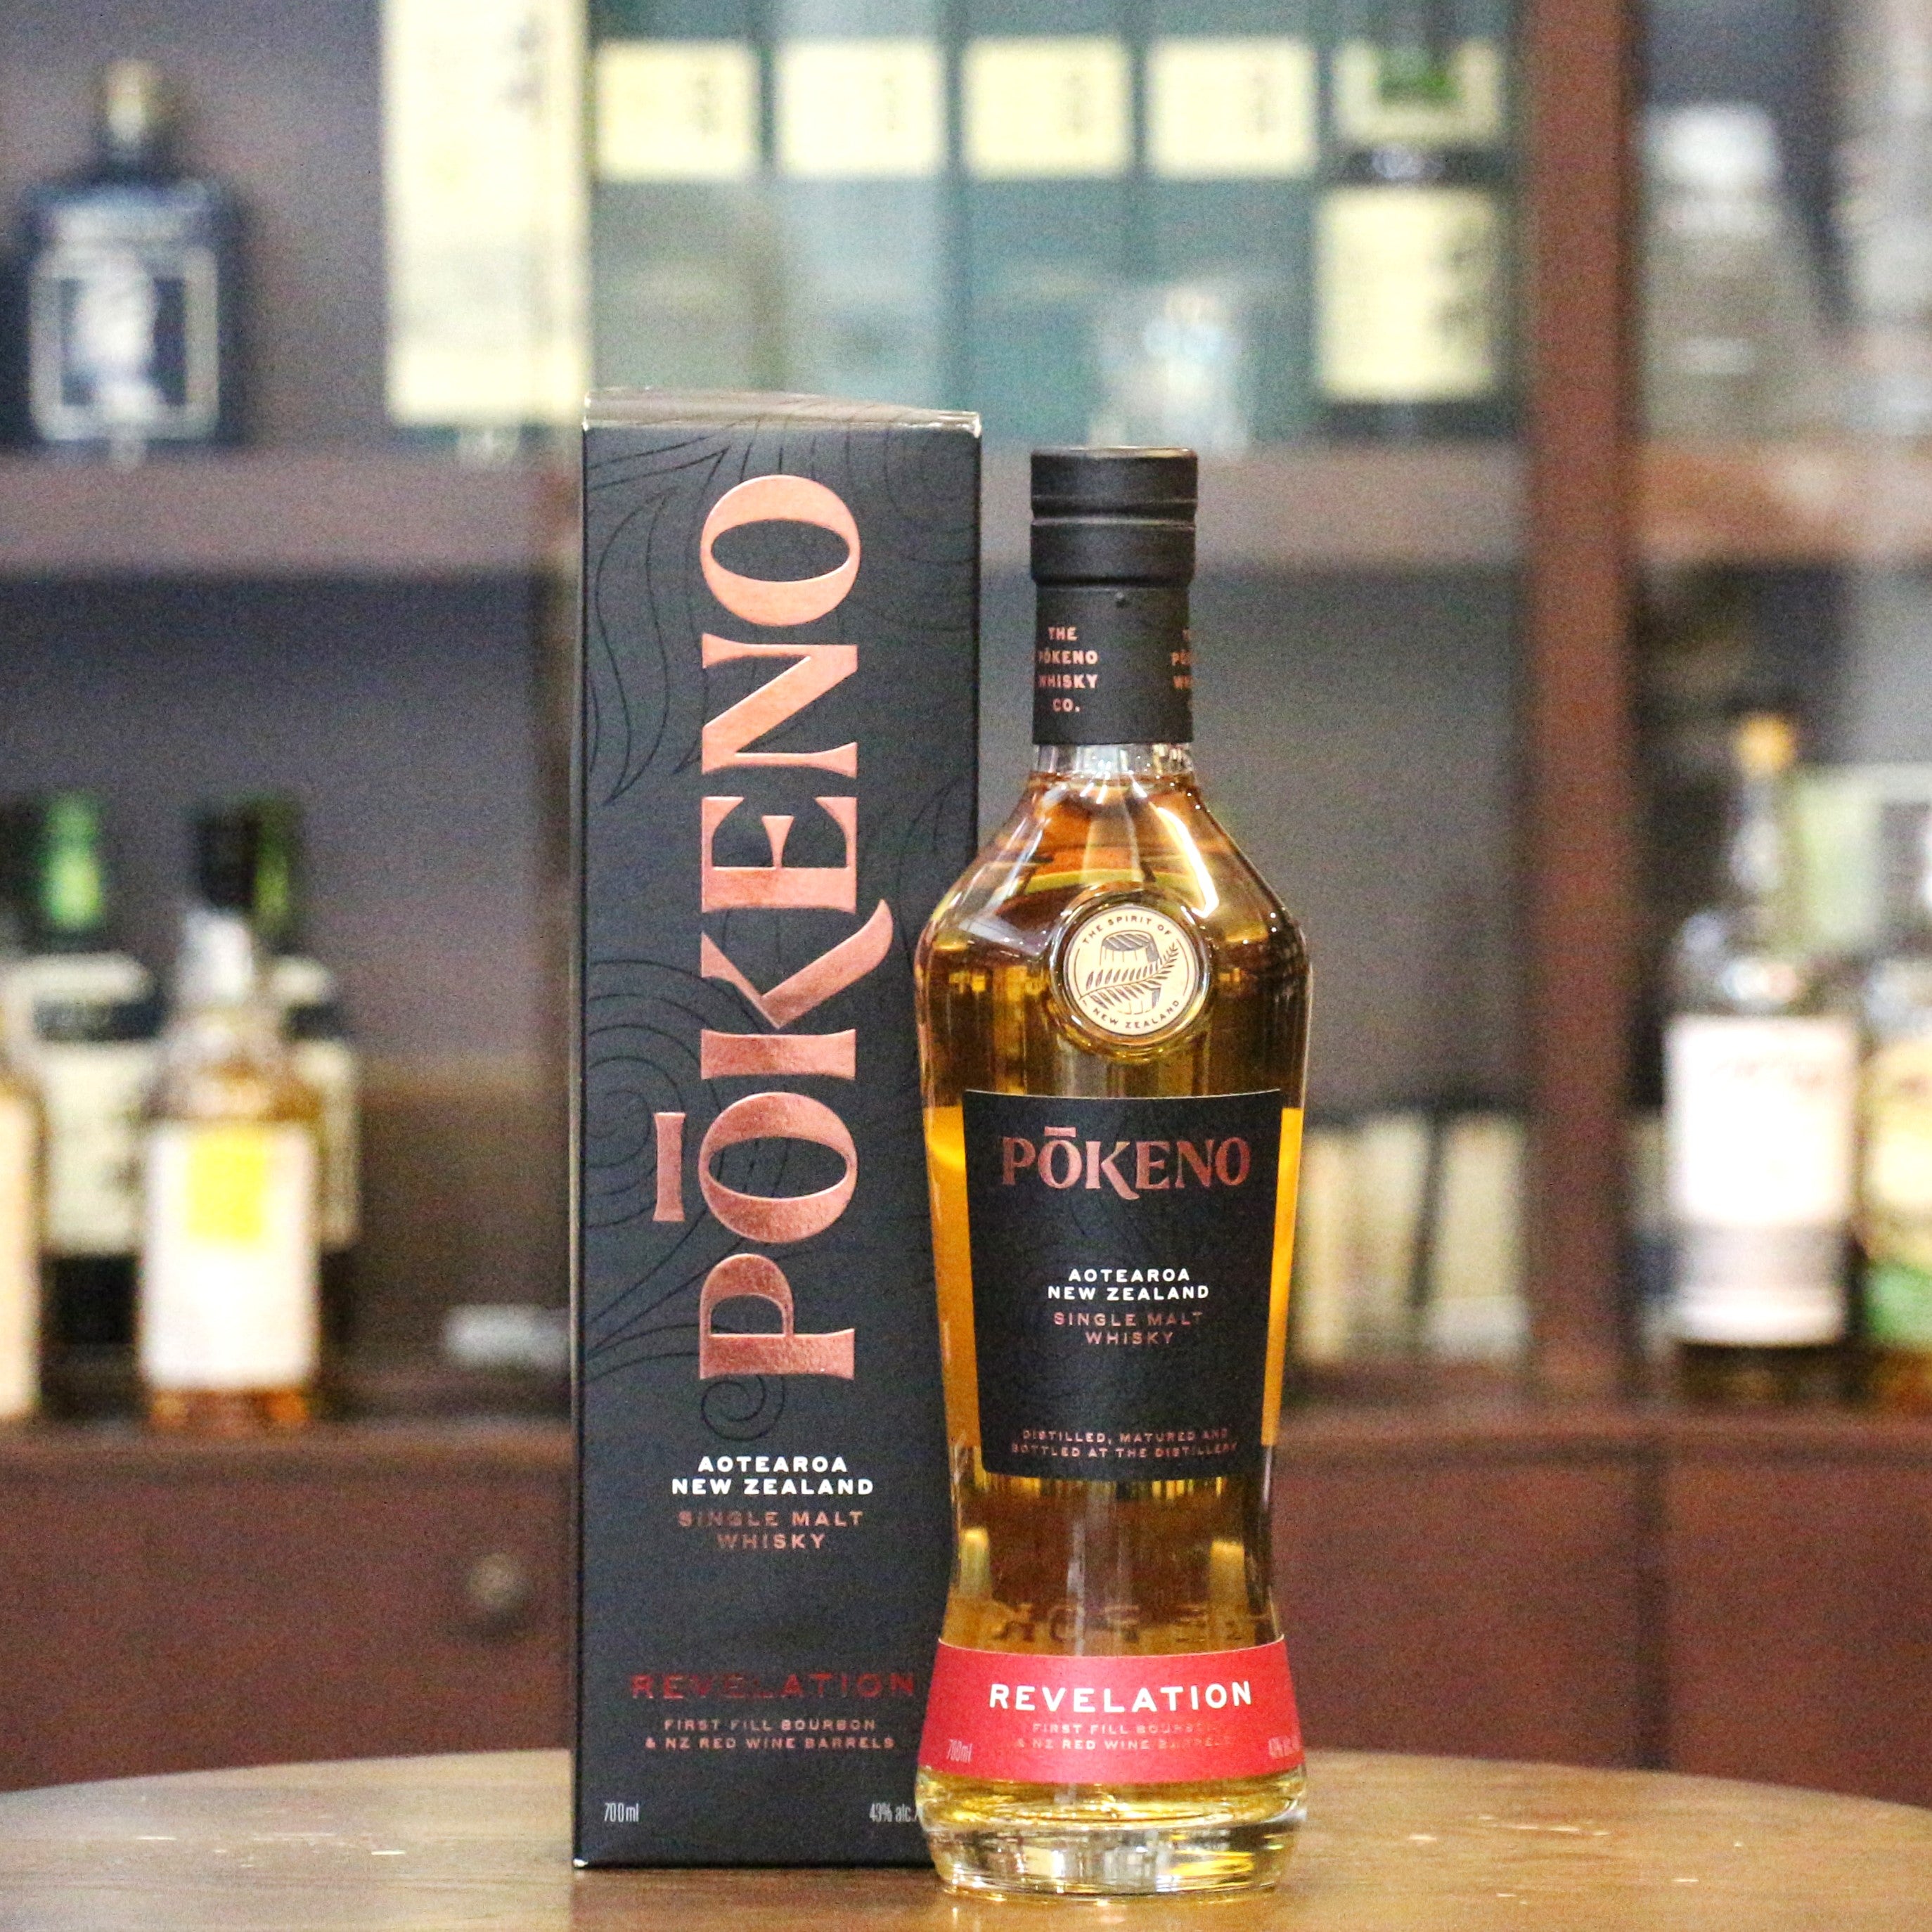 Pokeno Distillery from New Zealand's North Island, inspired by climate and culture uses the local ingredients. The "REVELATION" forms a part of the core range of their Single Malt releases and is matured in First Fill Bourbon and NZ Red Wine Barrels.